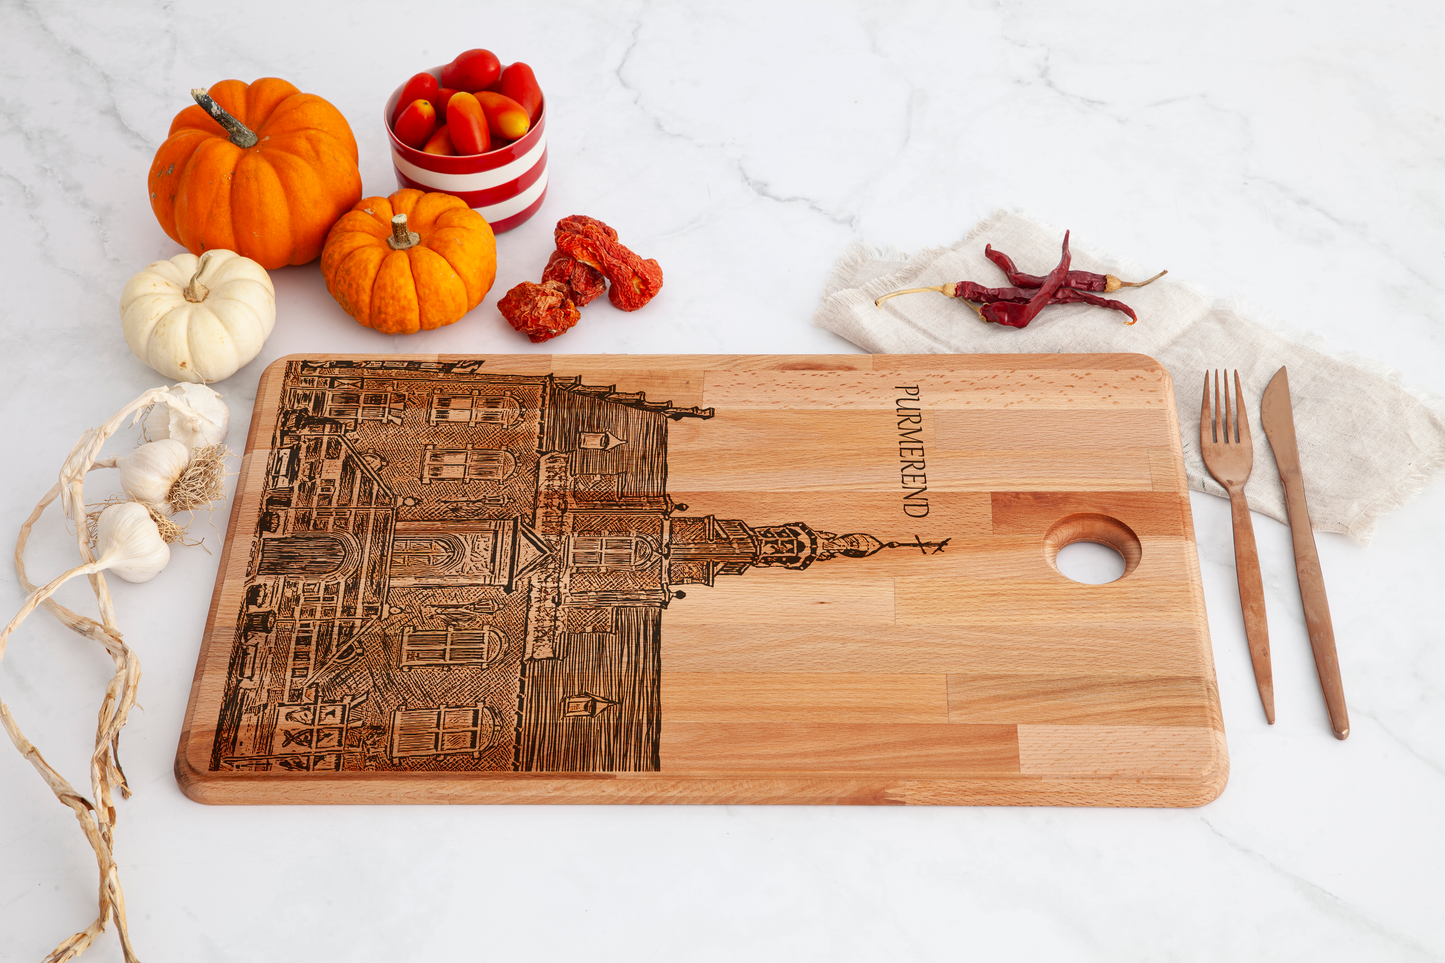 Purmerend, Stadhuis, cutting board, with knife